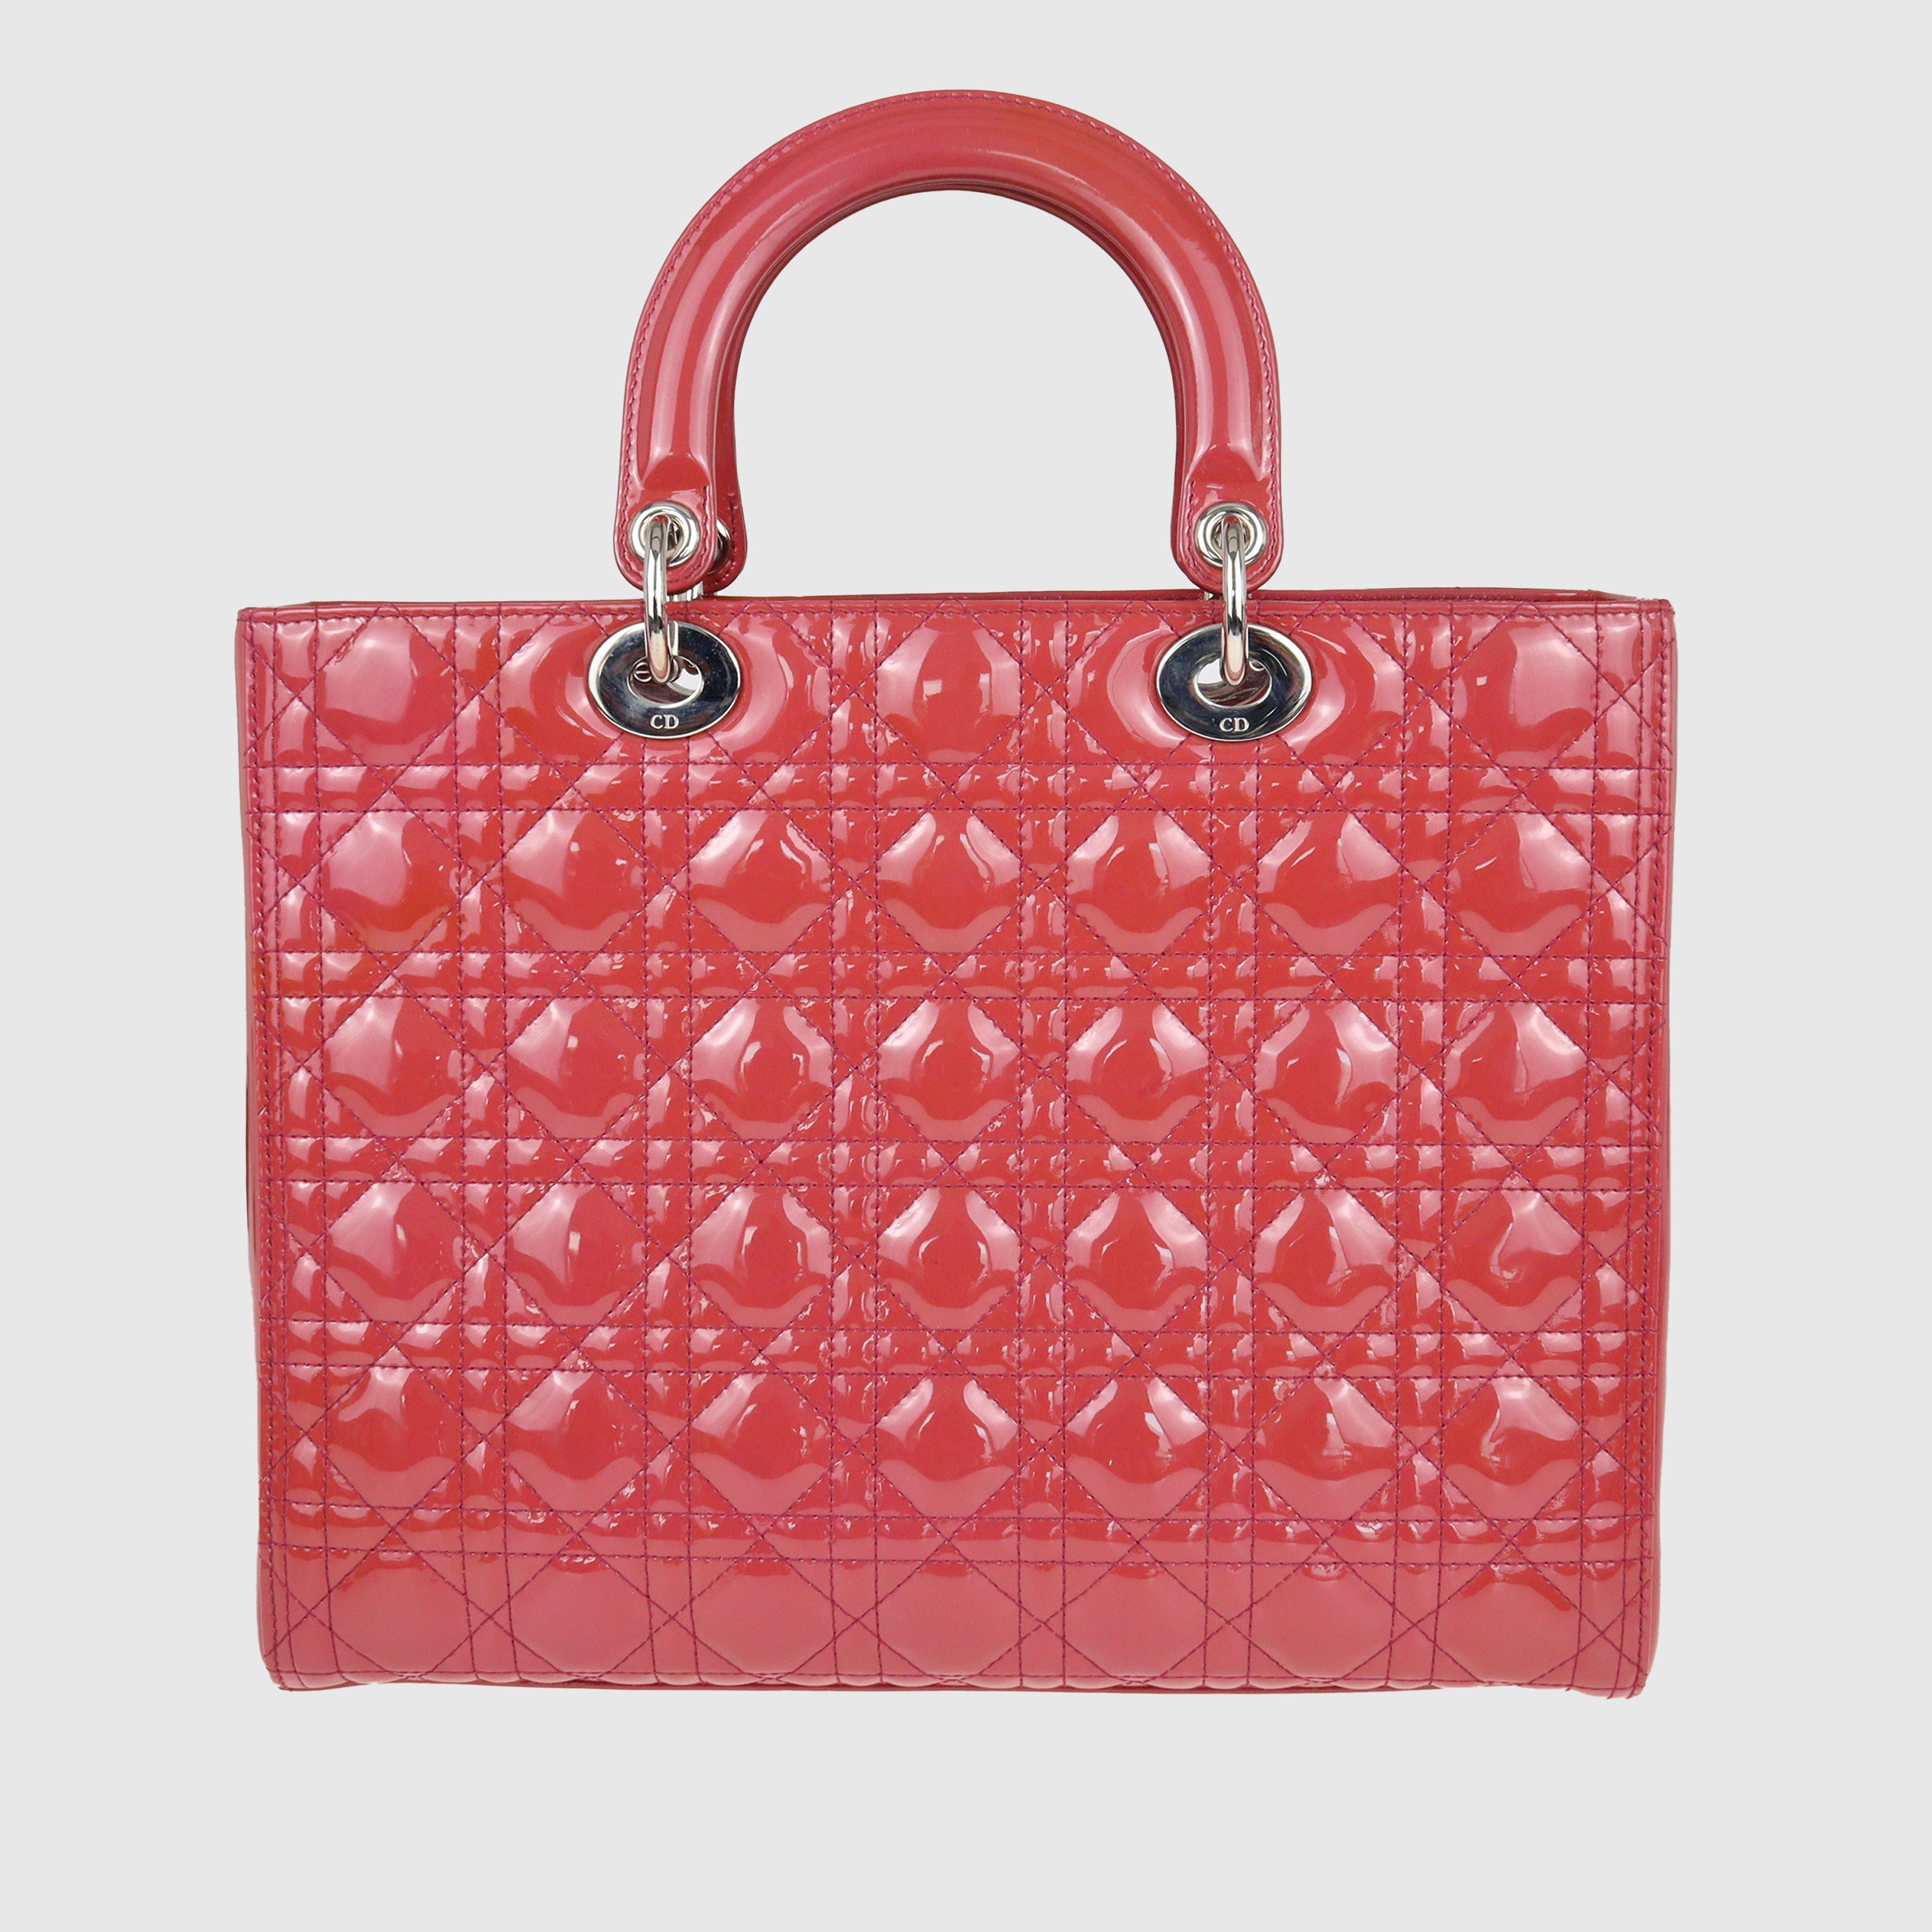 Red Canage Large Lady HandBag Bags Christian Dior 